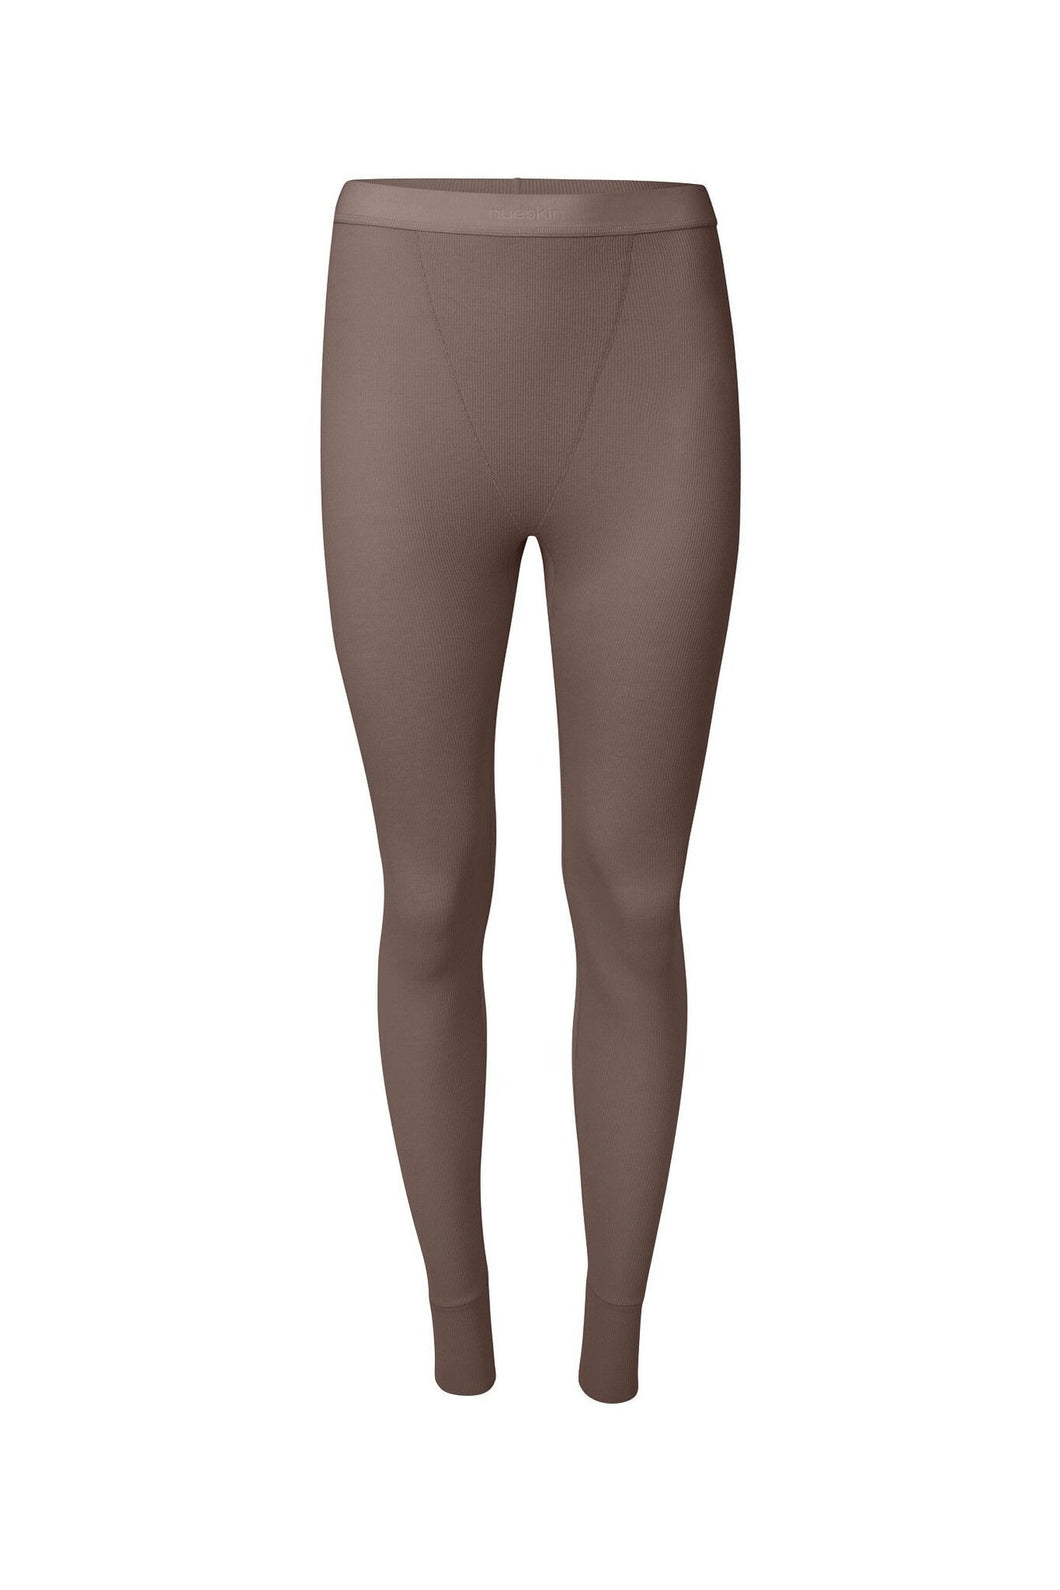 nueskin Laurie Rib Cotton Legging in color Deep Taupe and shape legging